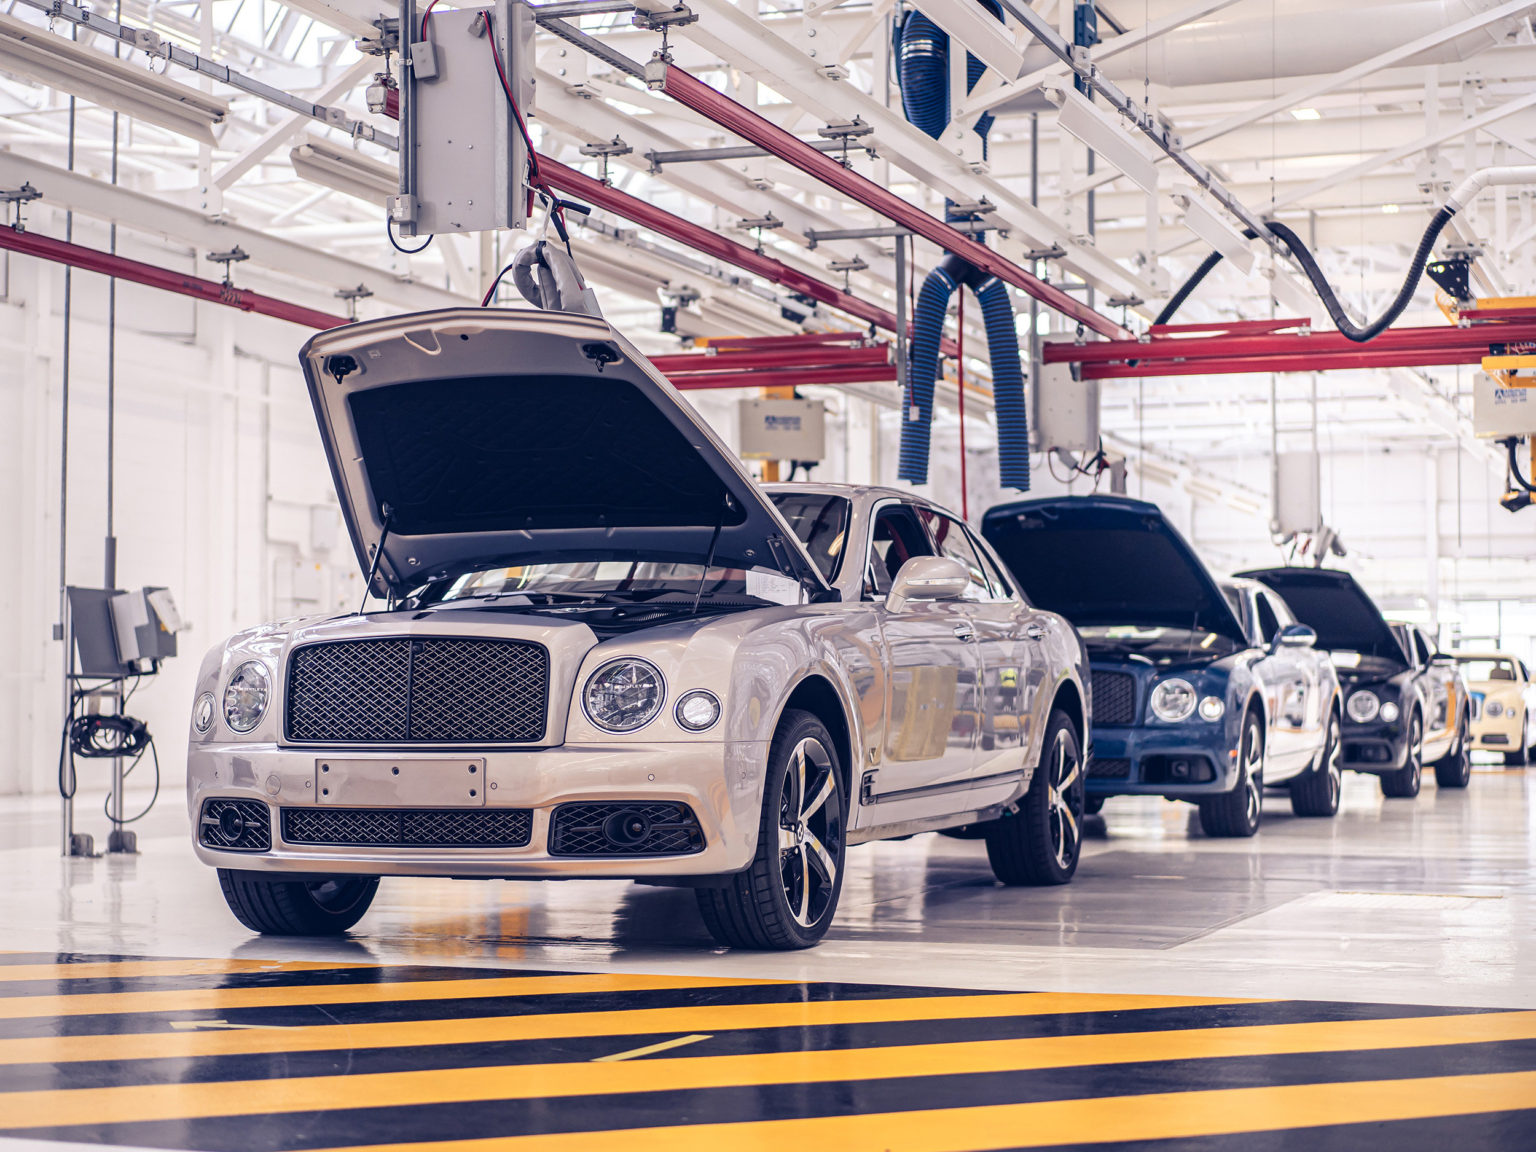 The Bentley Mulsanne has been replaced in the lineup by the newest Flying Spur iteration.